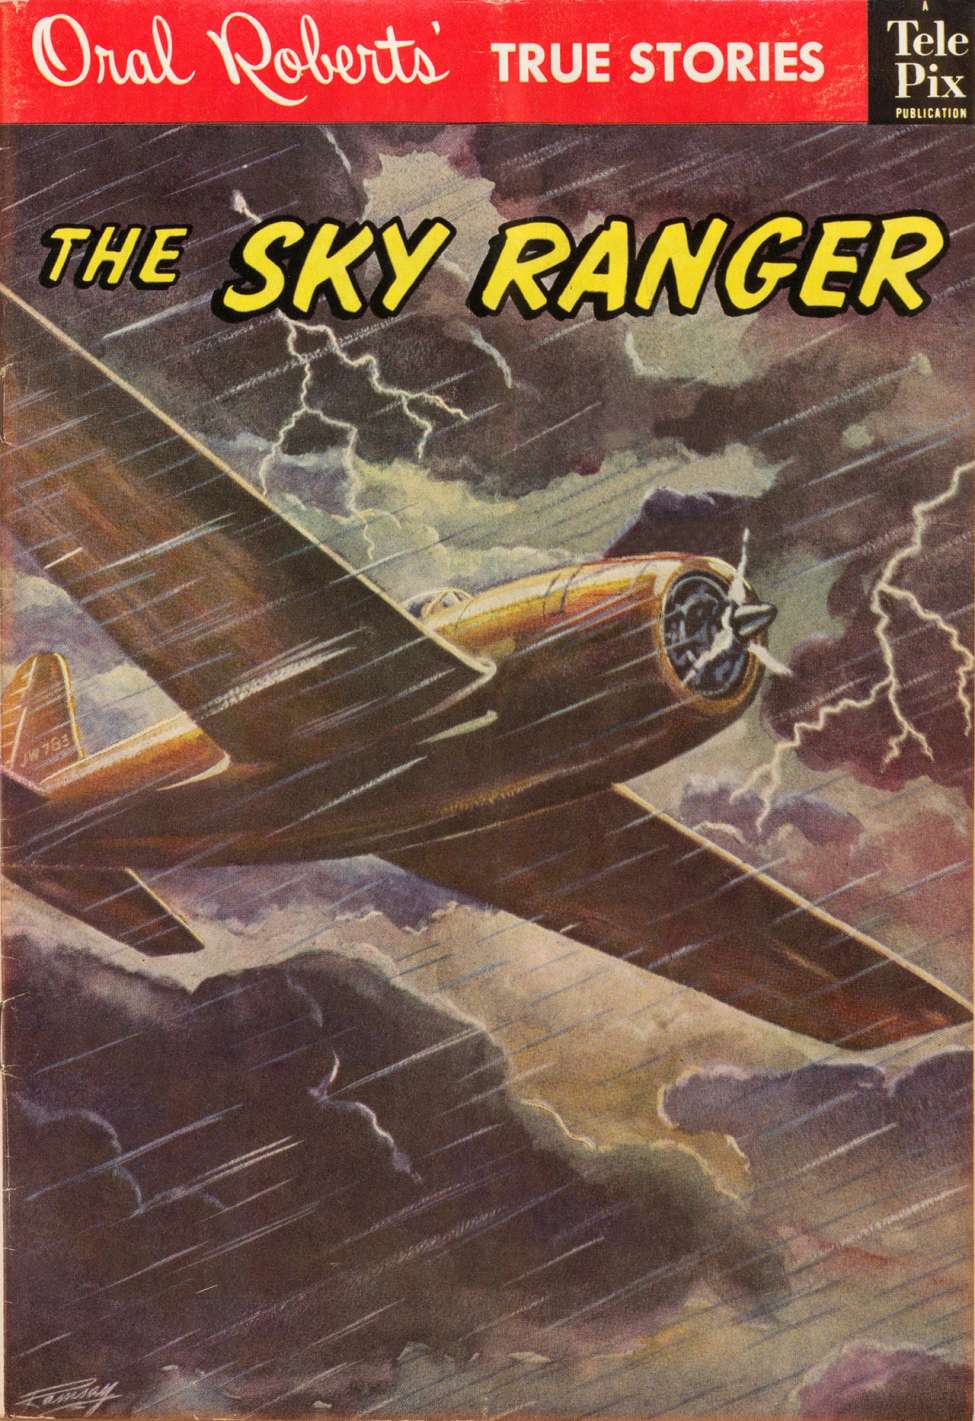 Comic Book Cover For Oral Roberts' True Stories 111 - The Sky Ranger